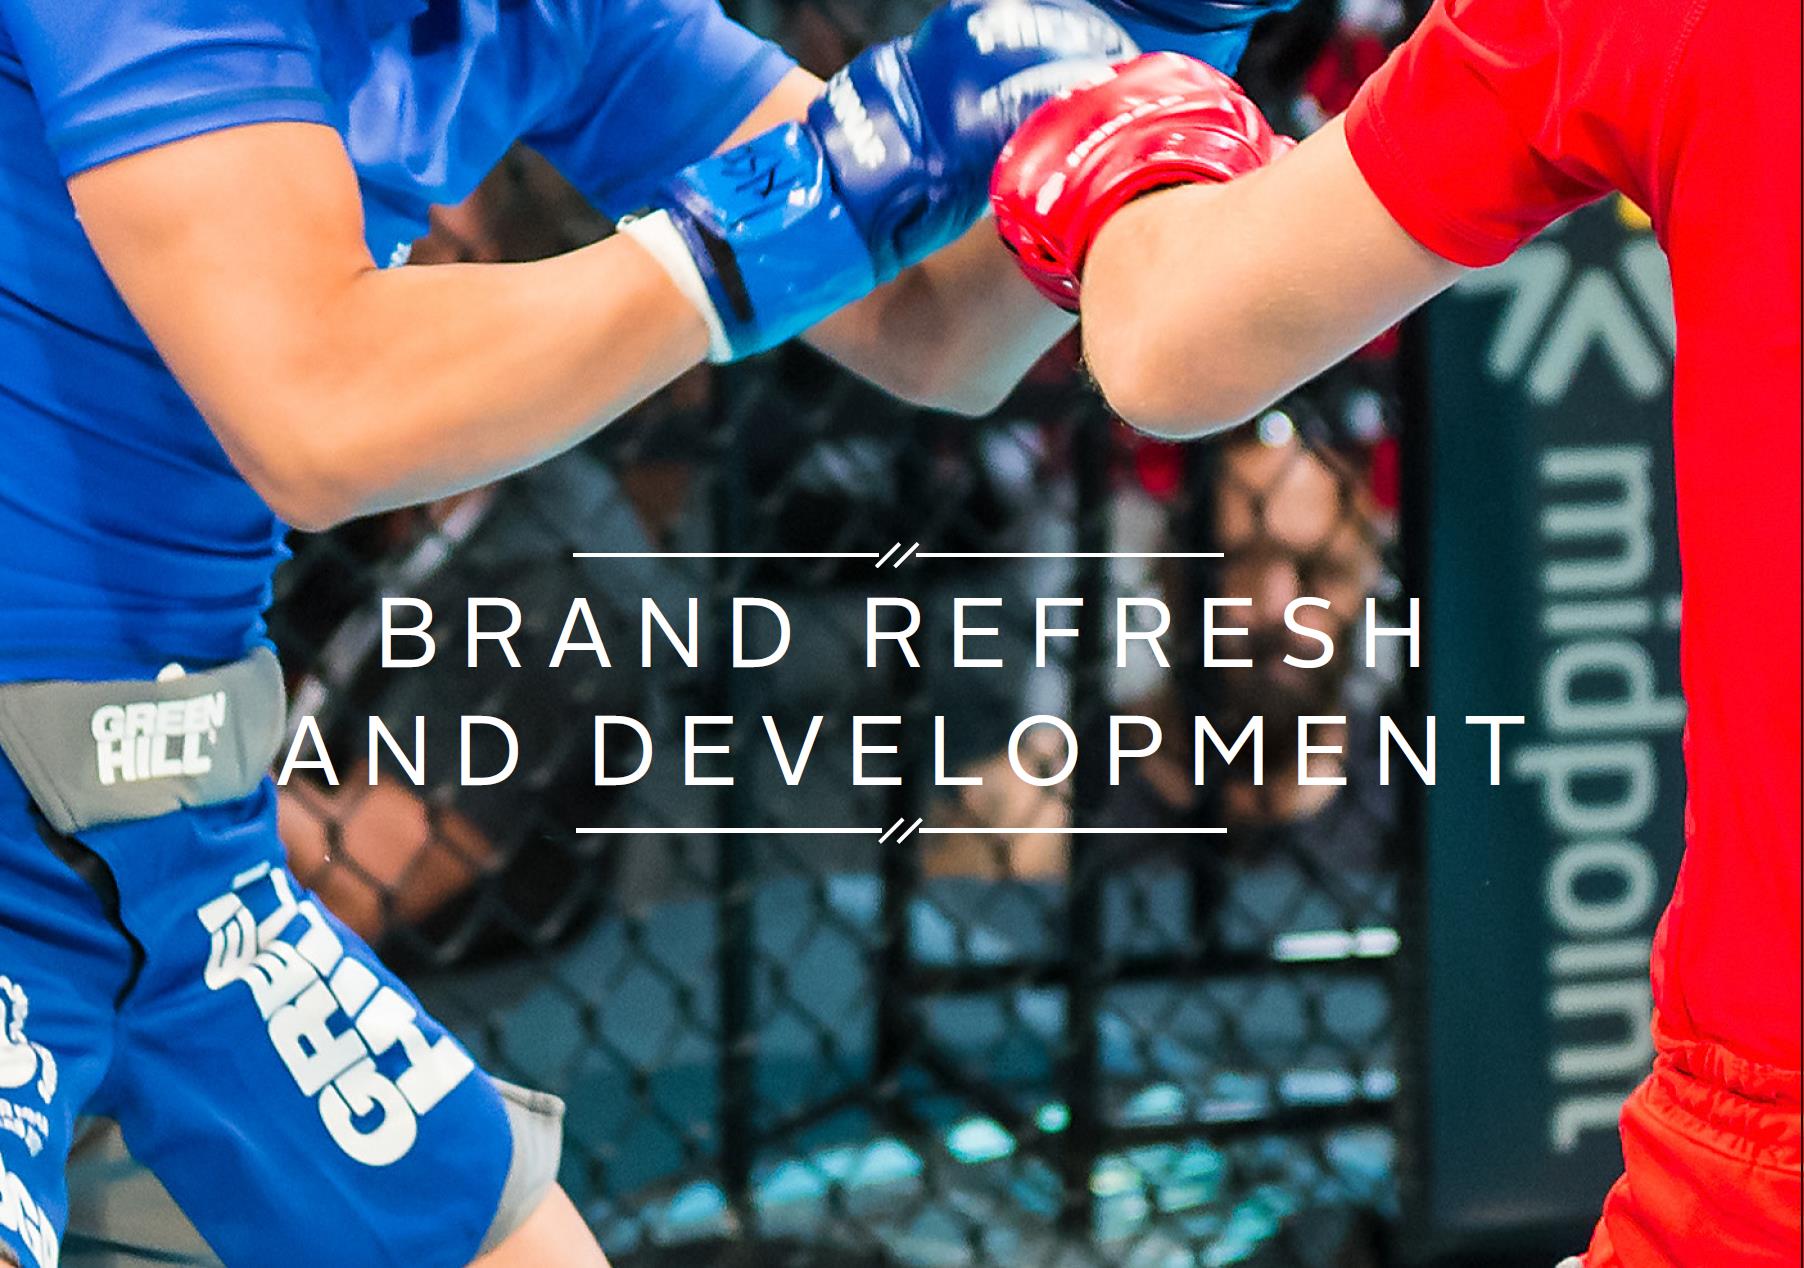 IMMAF LAUNCHES BRAND REFRESH FOR 2017